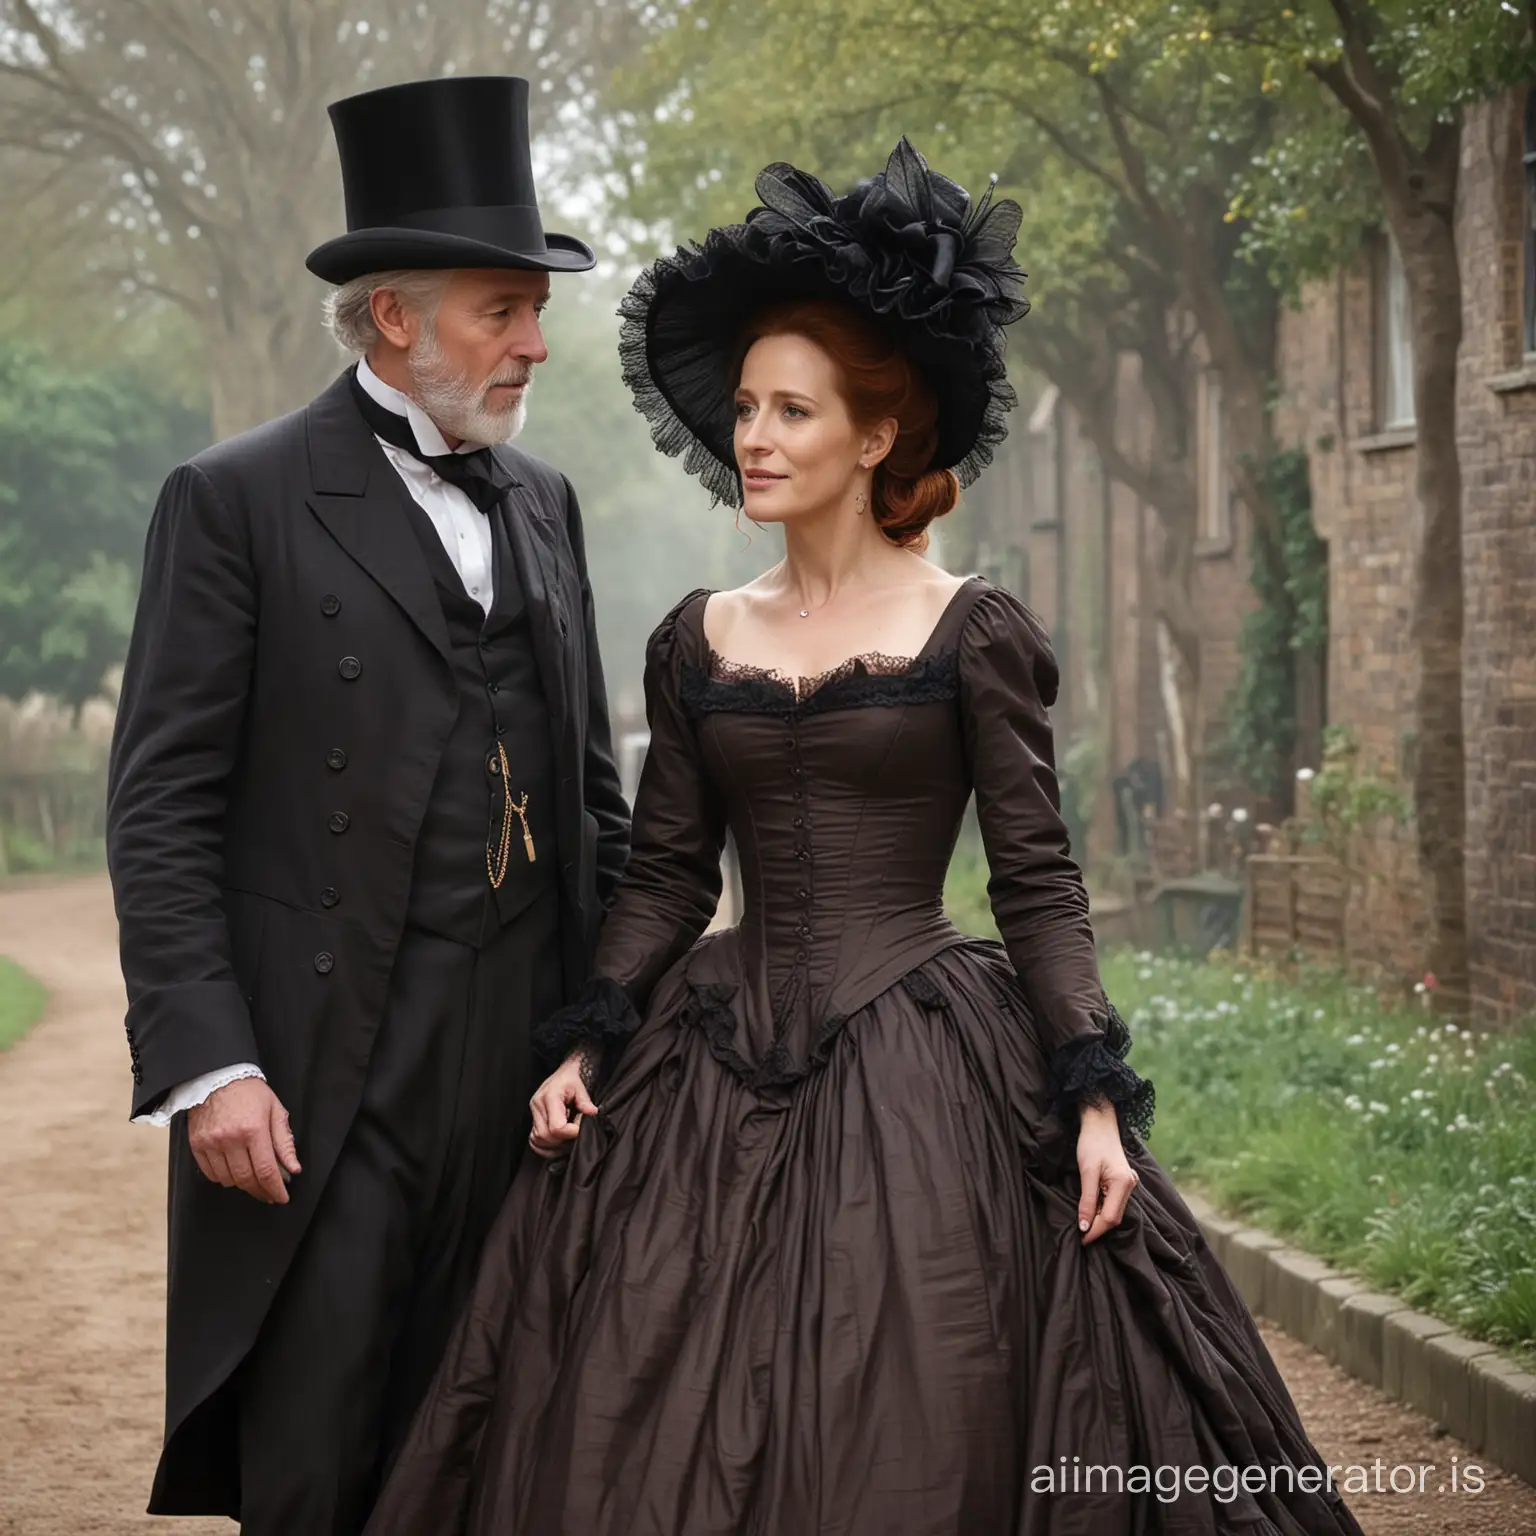 Elegant-RedHaired-Bride-and-Groom-Strolling-in-Victorian-Attire